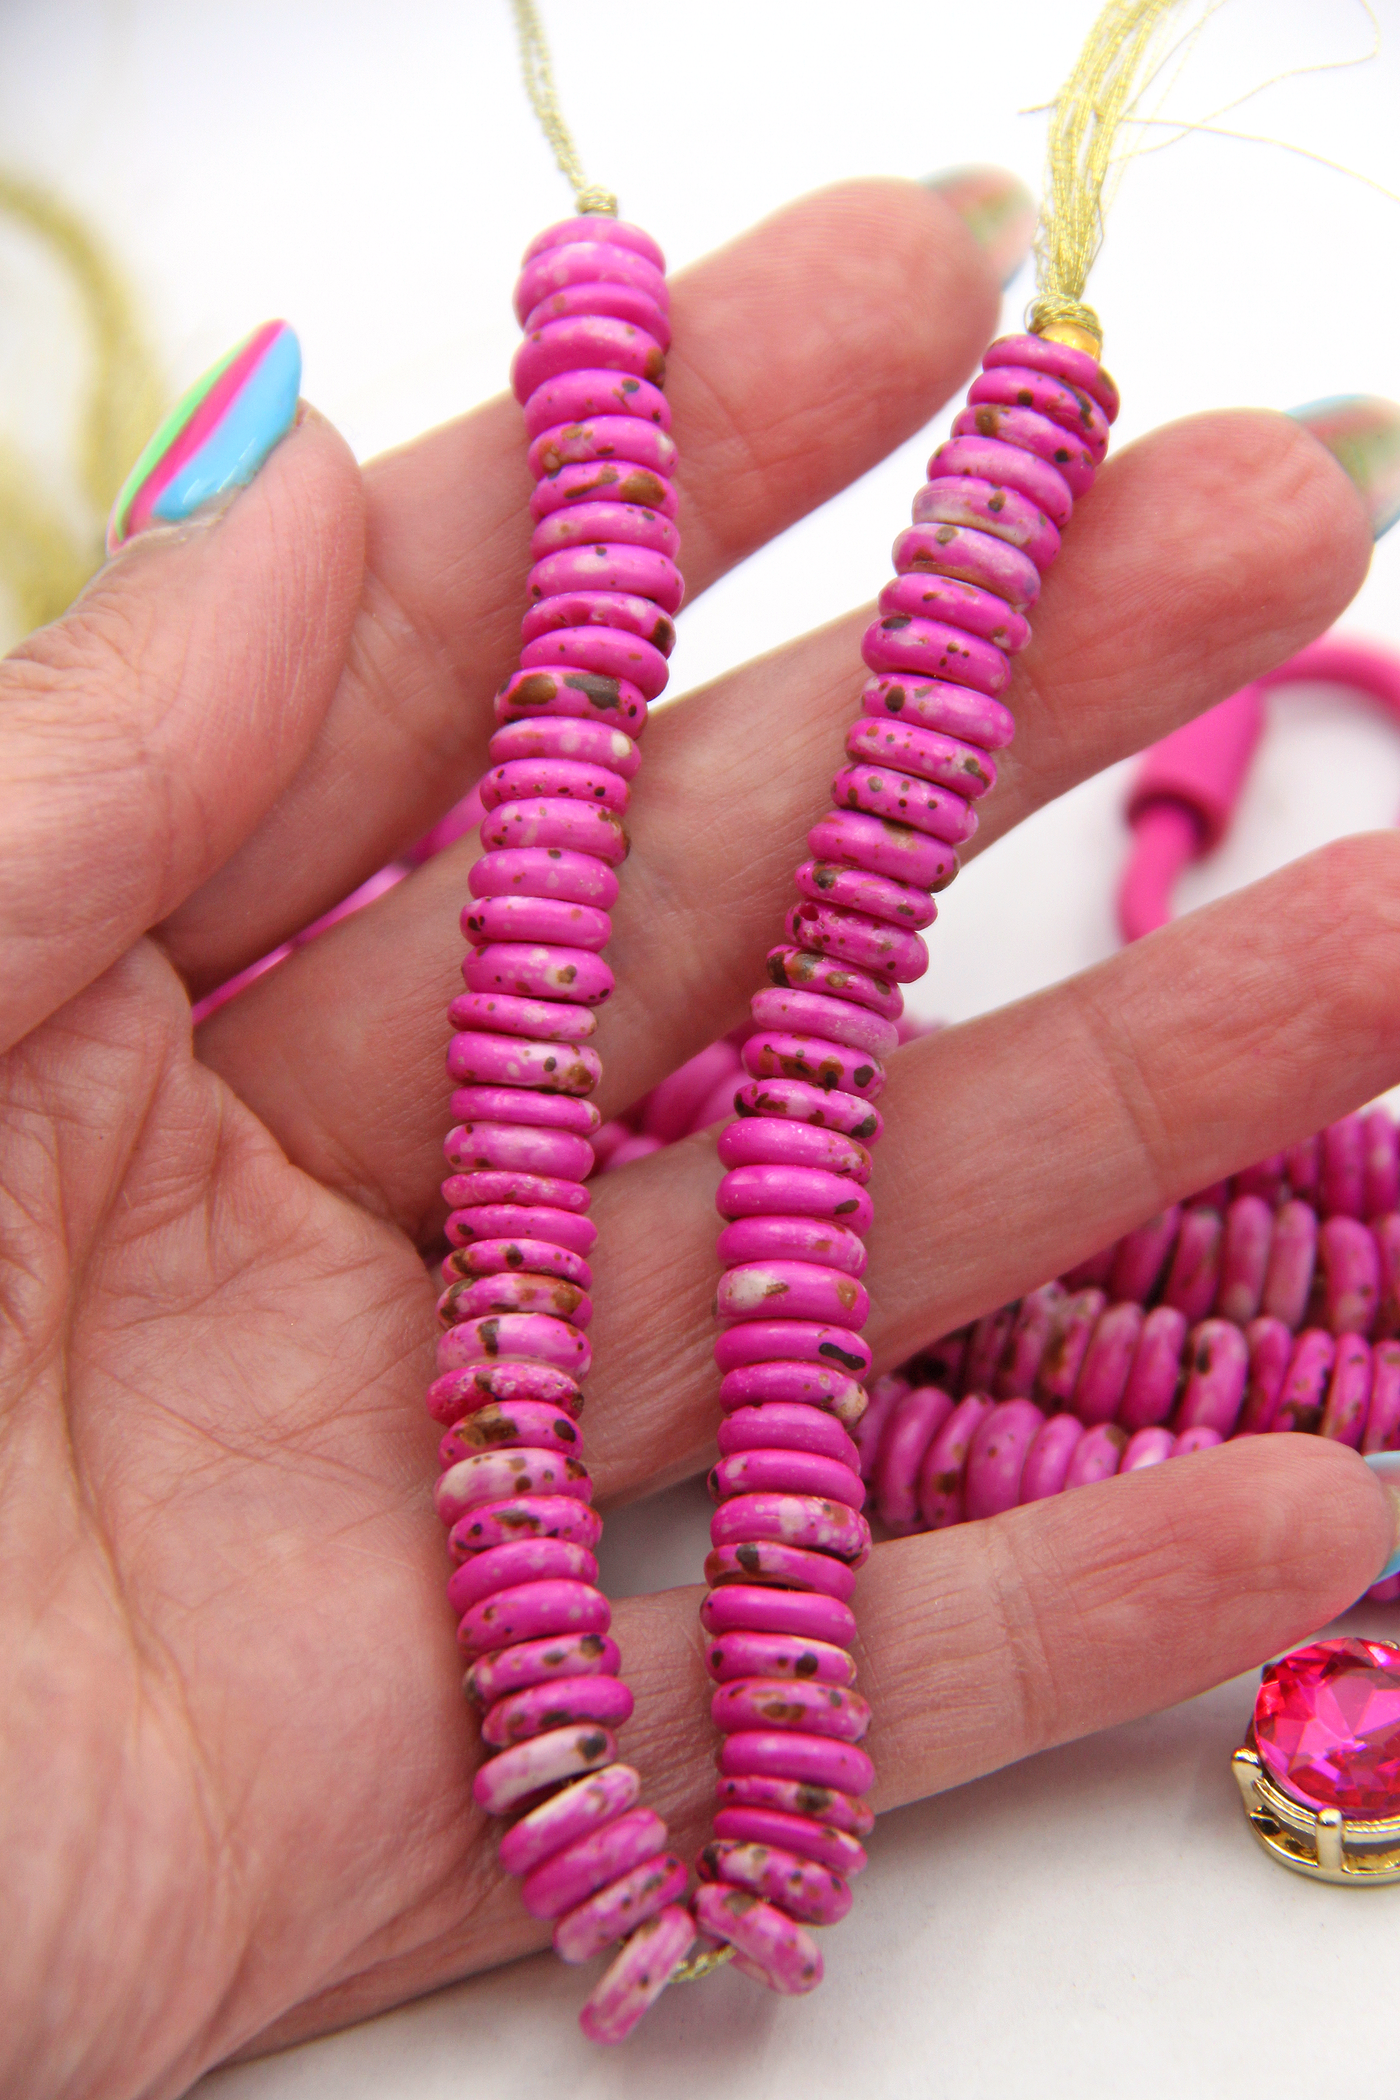 Pretty in Pink Bright Speckled Bone Beads, 9x3mm, 75 beads for making Barbiecore bracelets